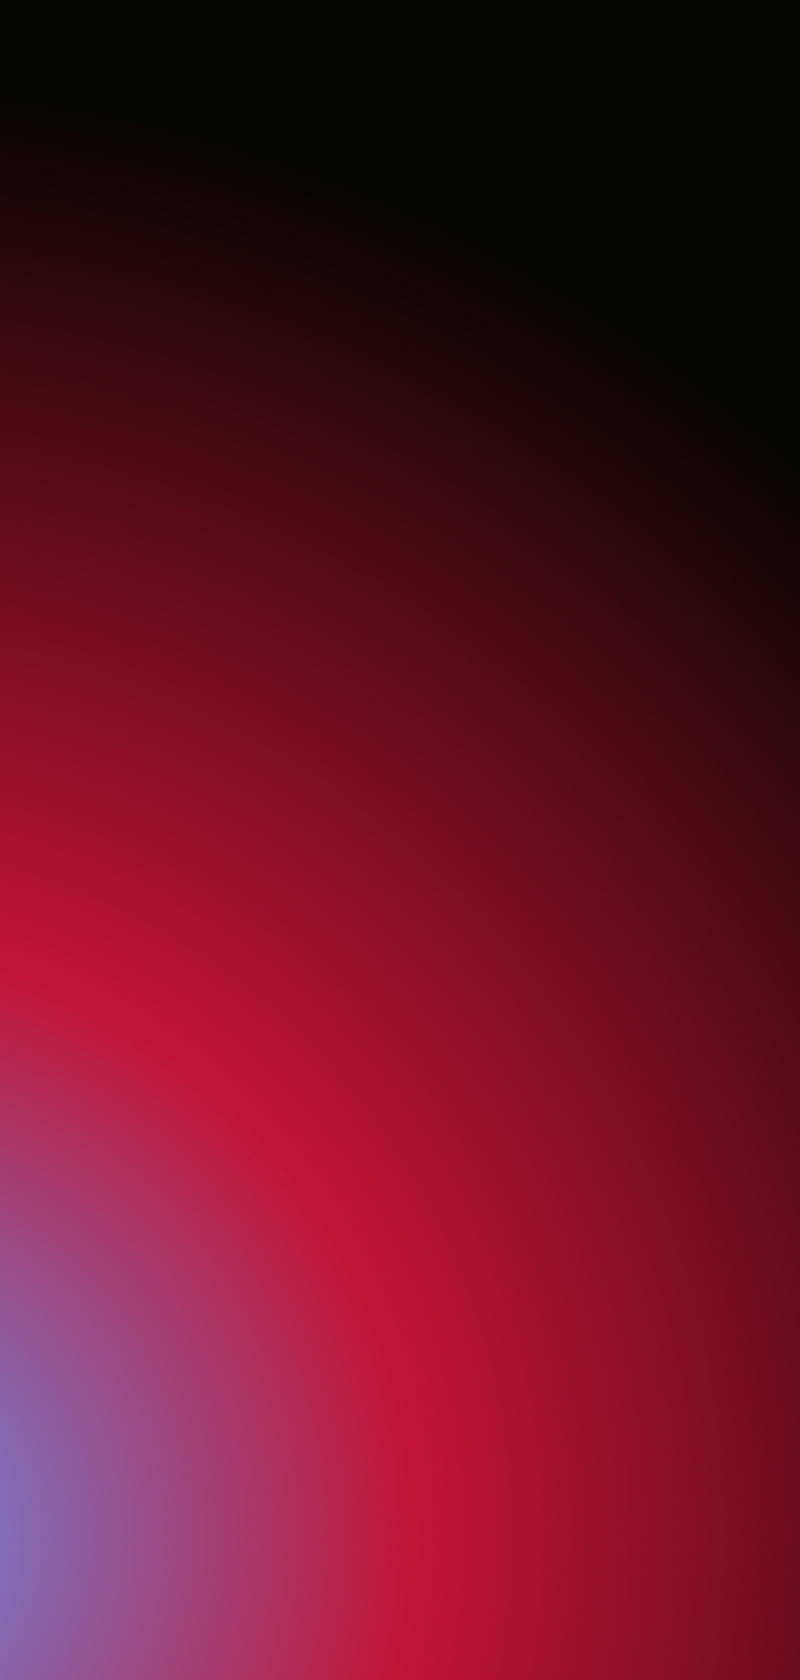 Black, Red, And Blue Aura Aesthetic Wallpaper